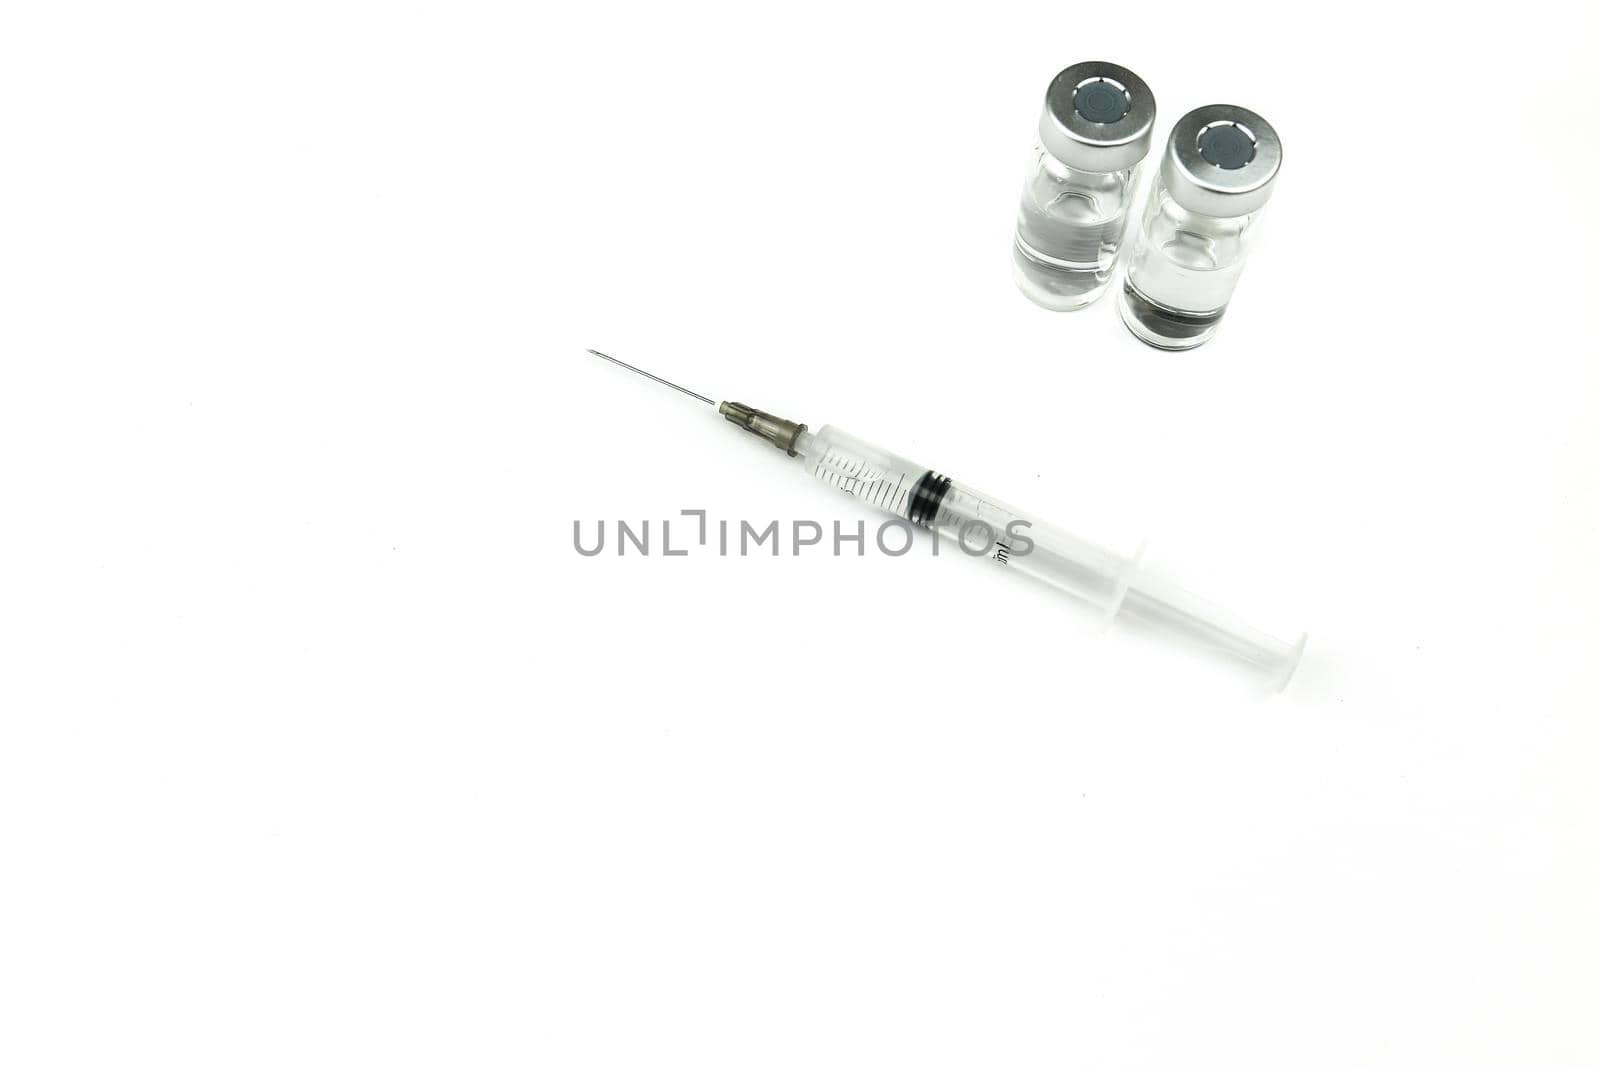 Close up picture of syringe and vials filled with liquid of vaccine on white background.